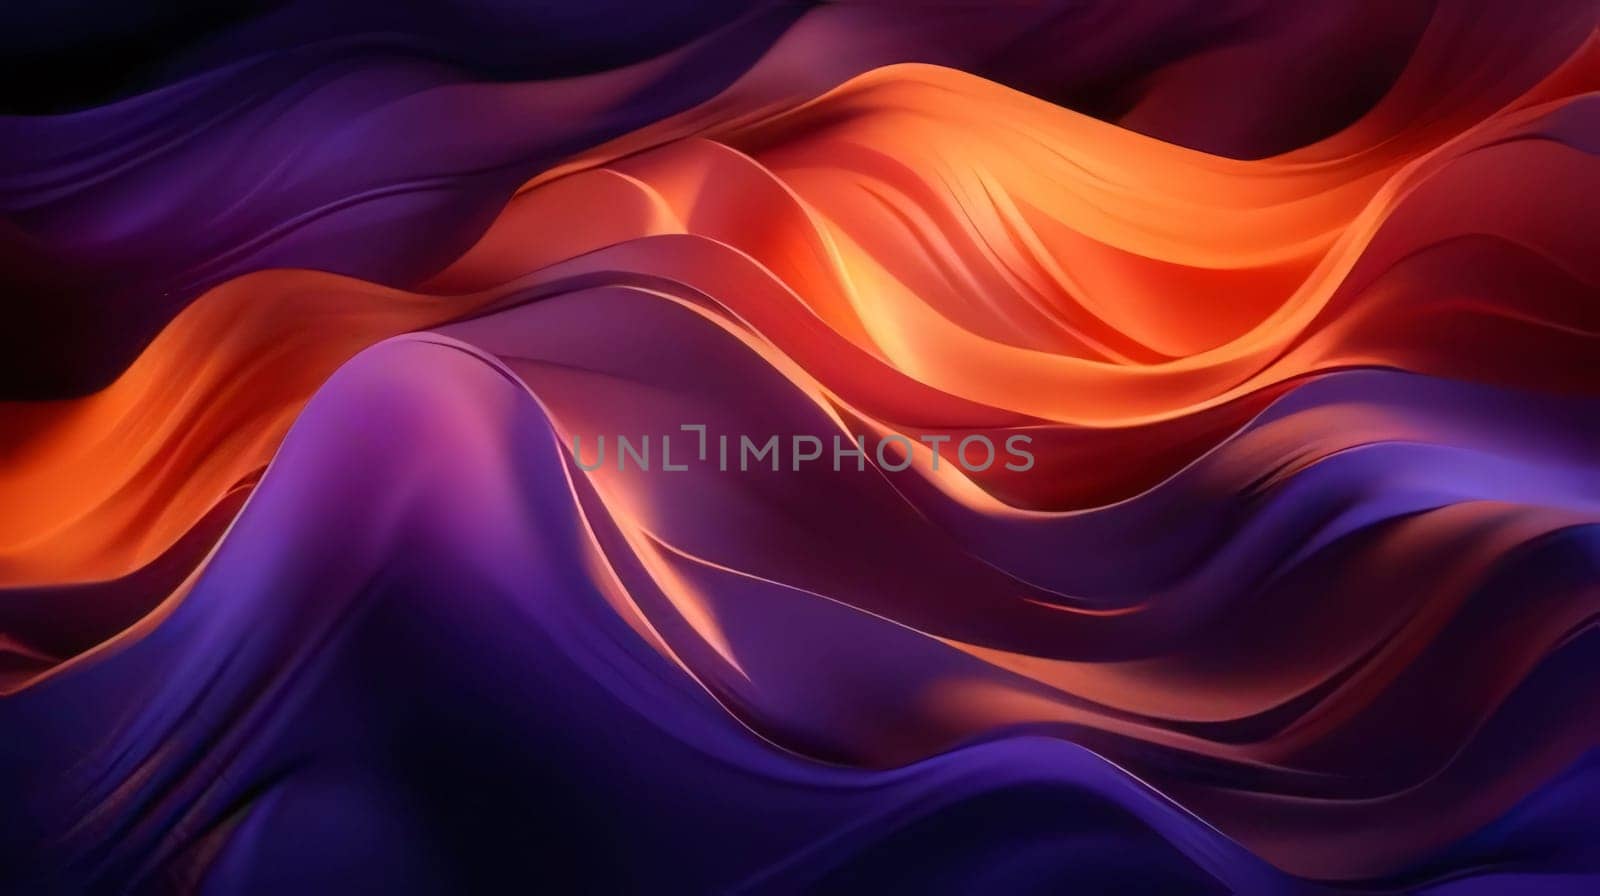 Abstract background design: abstract background with smooth wavy lines in purple and orange colors